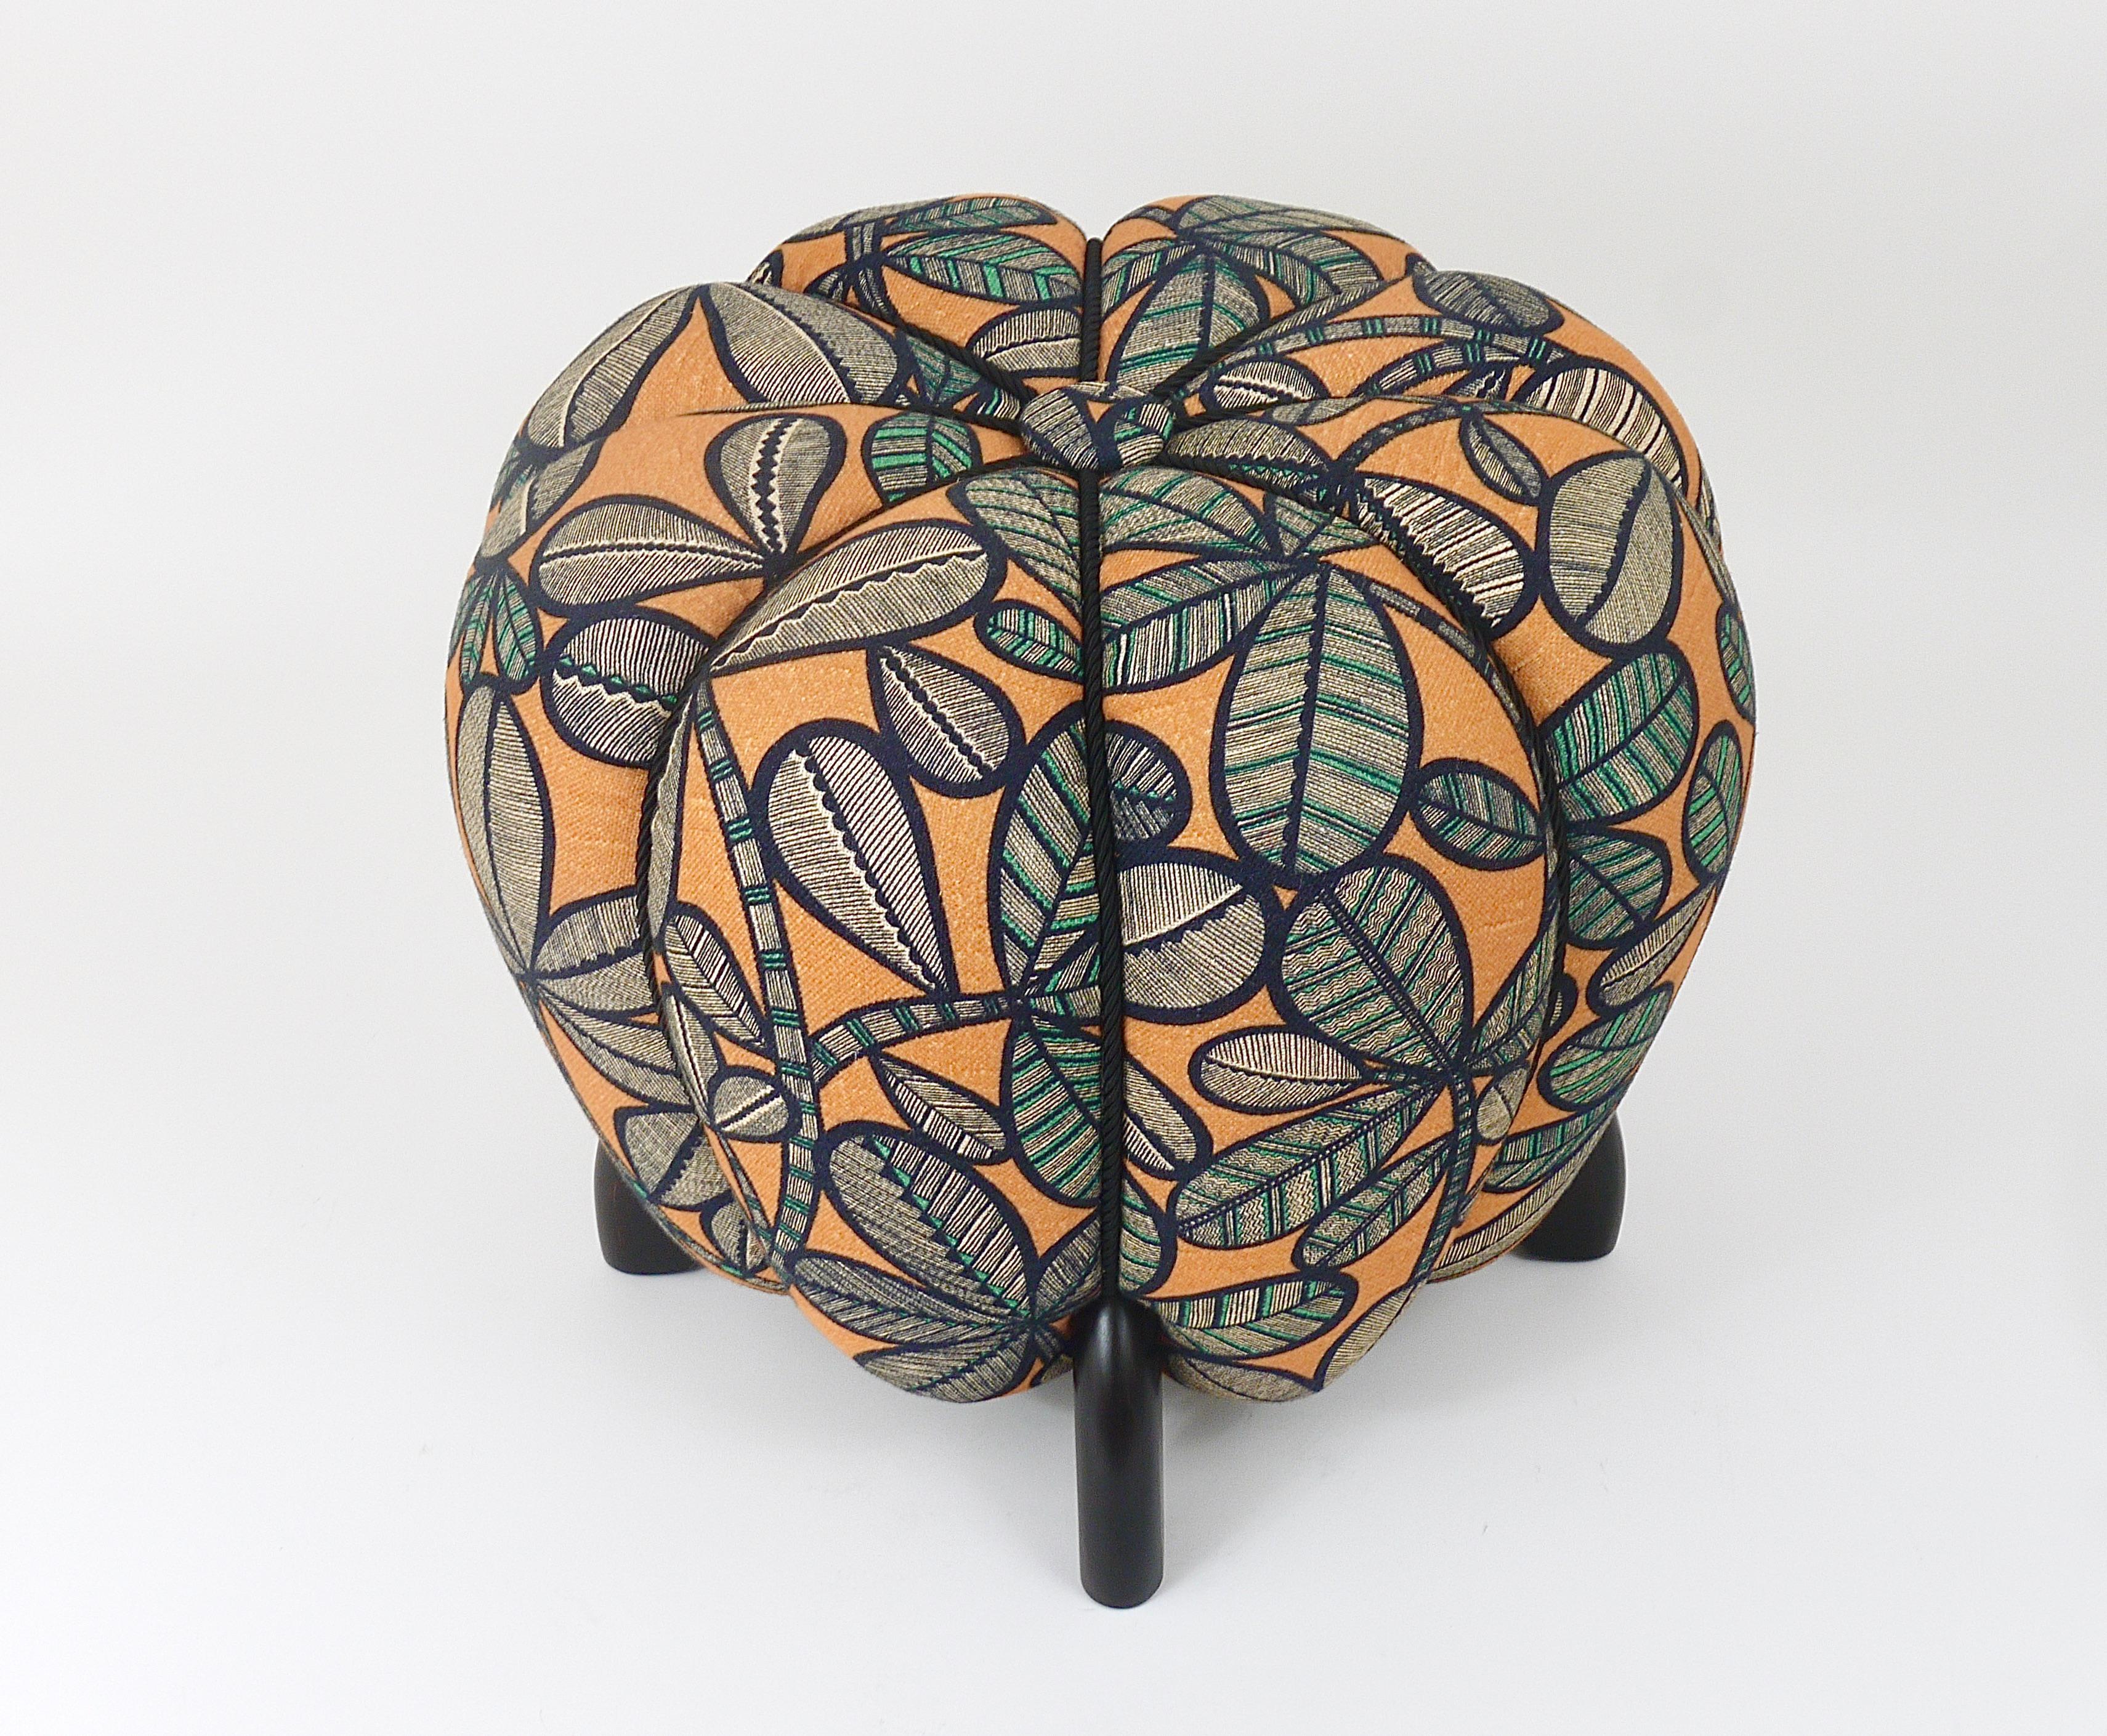 Up to 3 Art Deco Jindrich Halabala Stool, Leaf Pattern, Pouf, Ottoman, 1930s In Excellent Condition For Sale In Vienna, AT